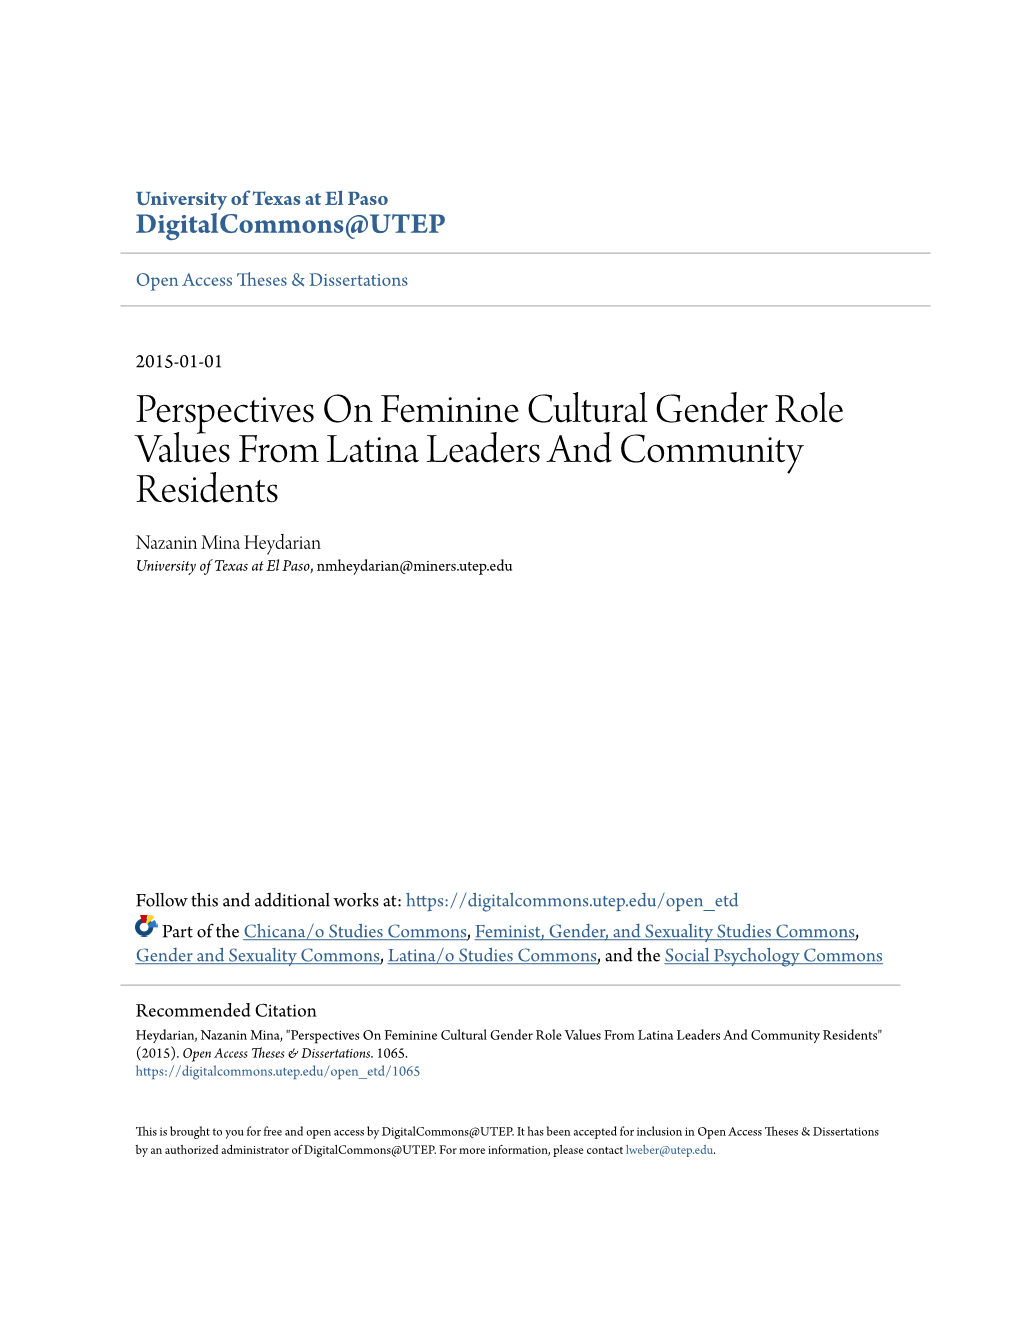 Perspectives on Feminine Cultural Gender Role Values from Latina